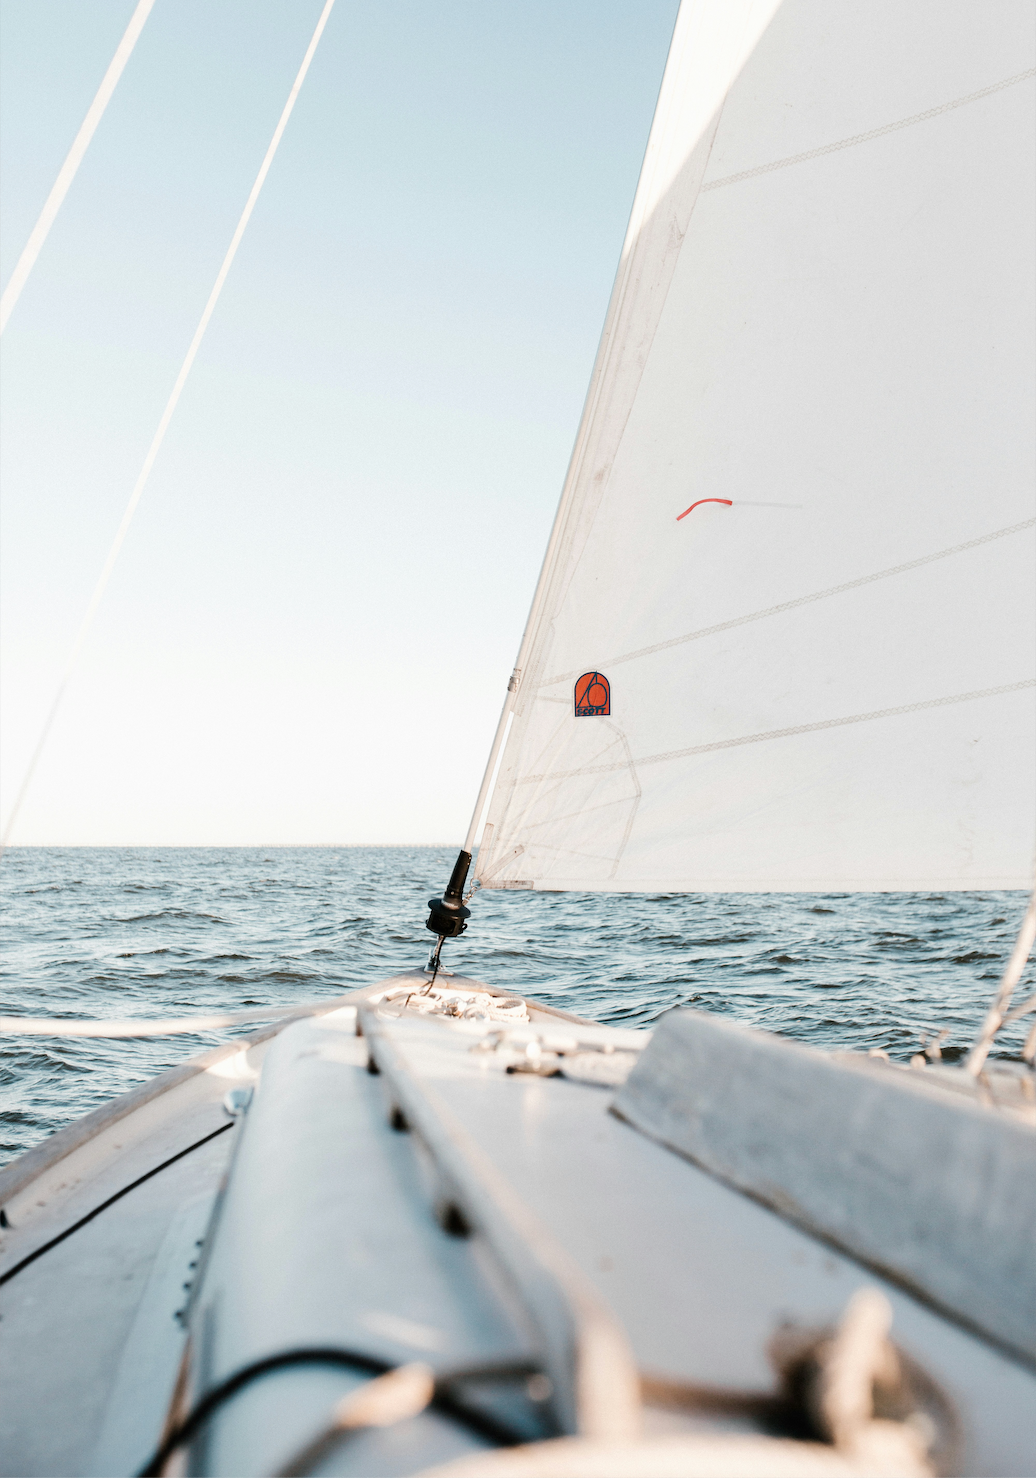 How to Dress for a Summer Sailing Trip: Complete Guide for Packing